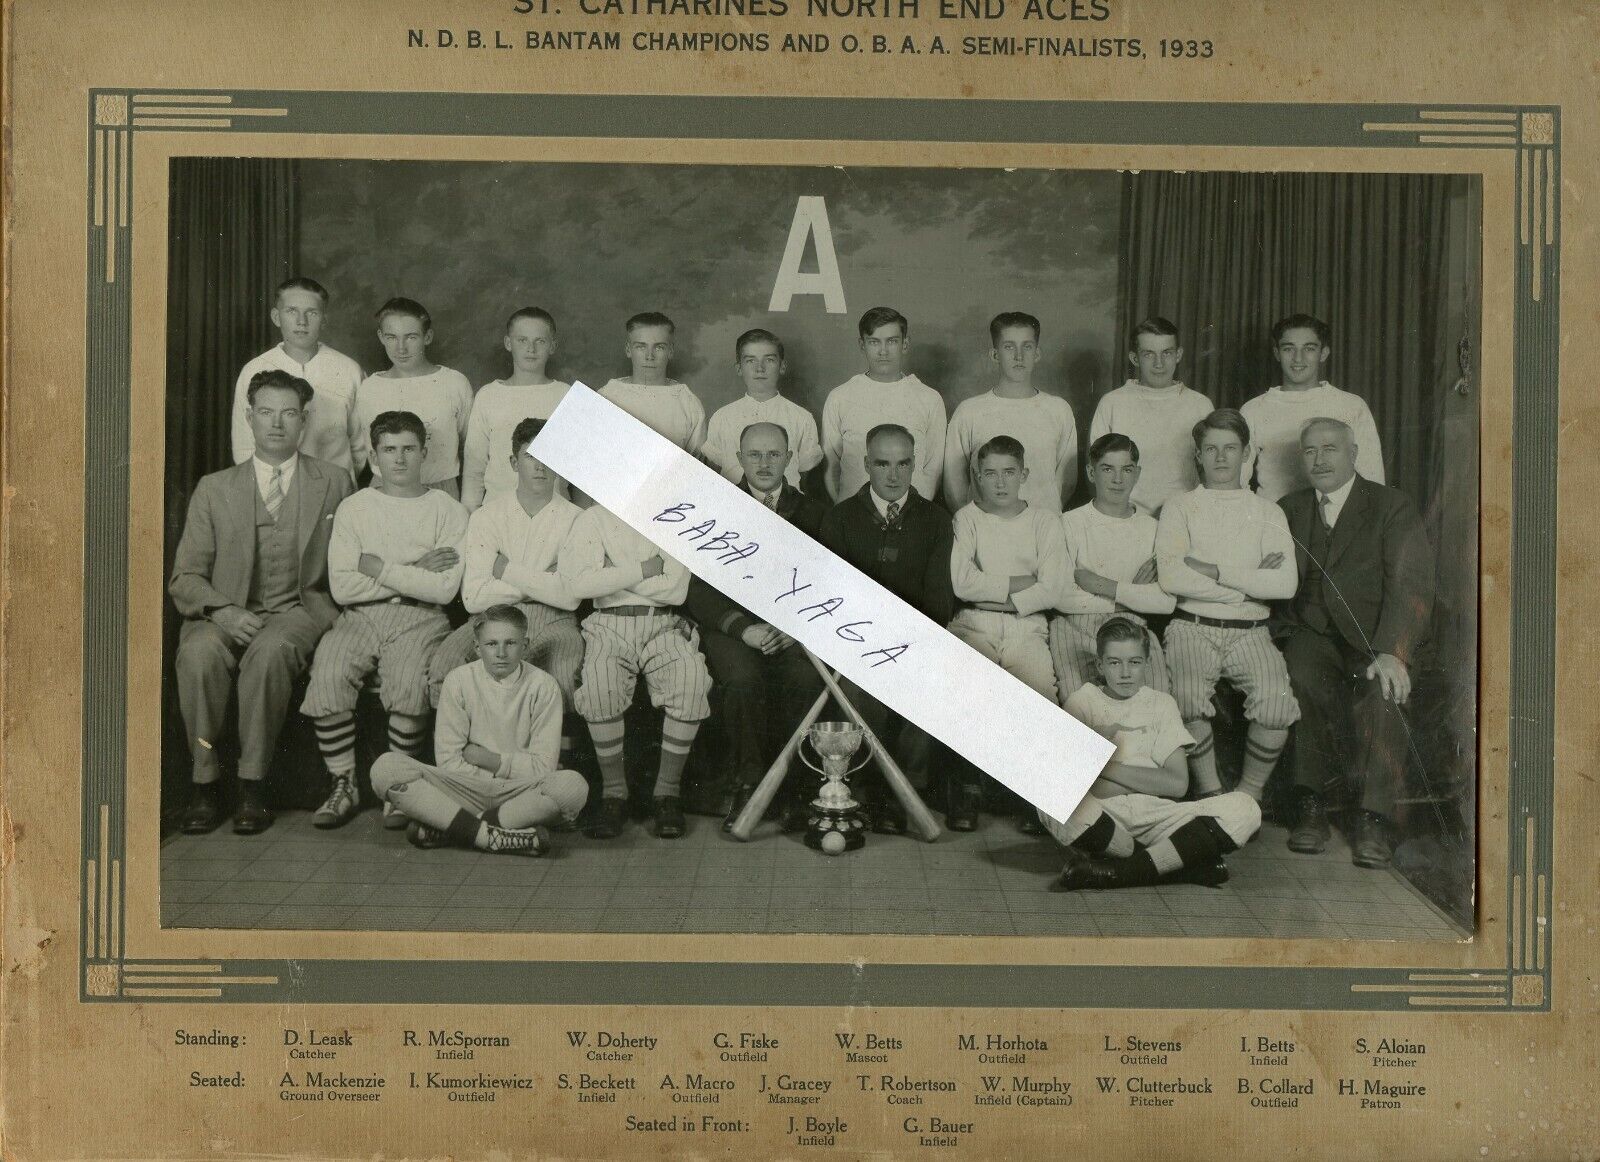 St. Catharines North End Aces Baseball Team Vintage Photo 1933 Ontario Canada